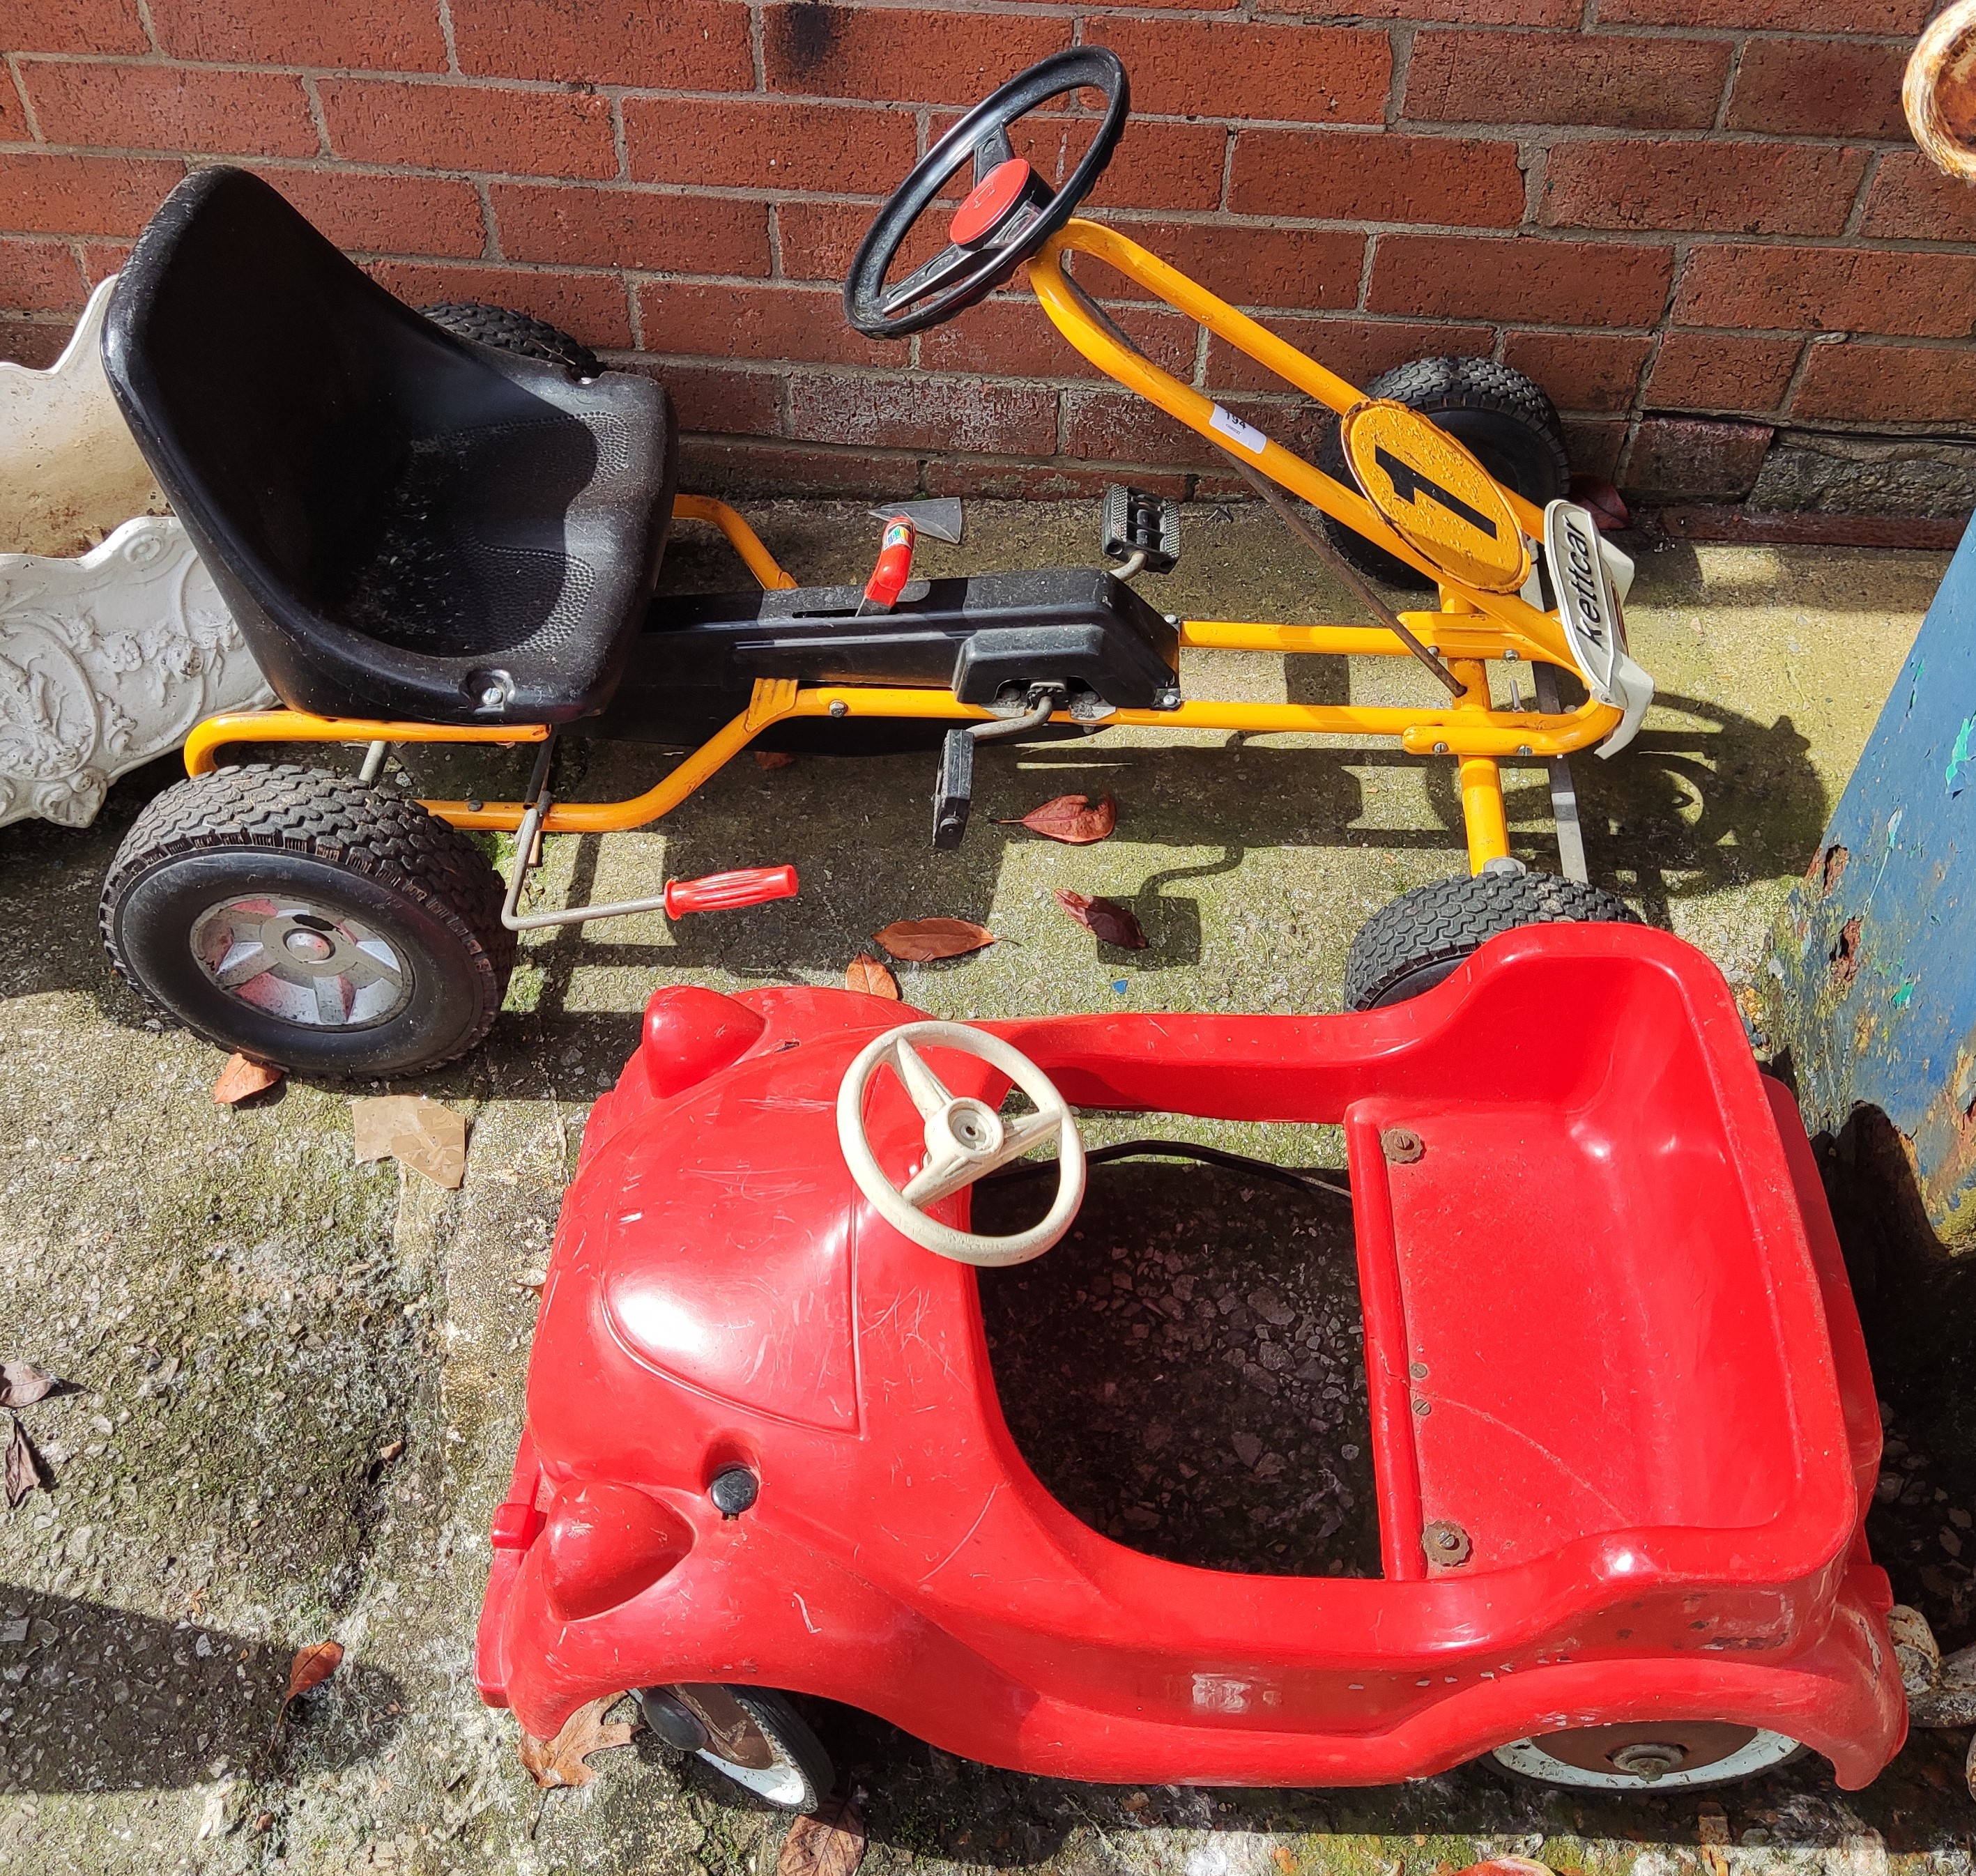 A Kettcar Hockenheim go cart (some wear / rust to number) and a red toy car (seat cracked)